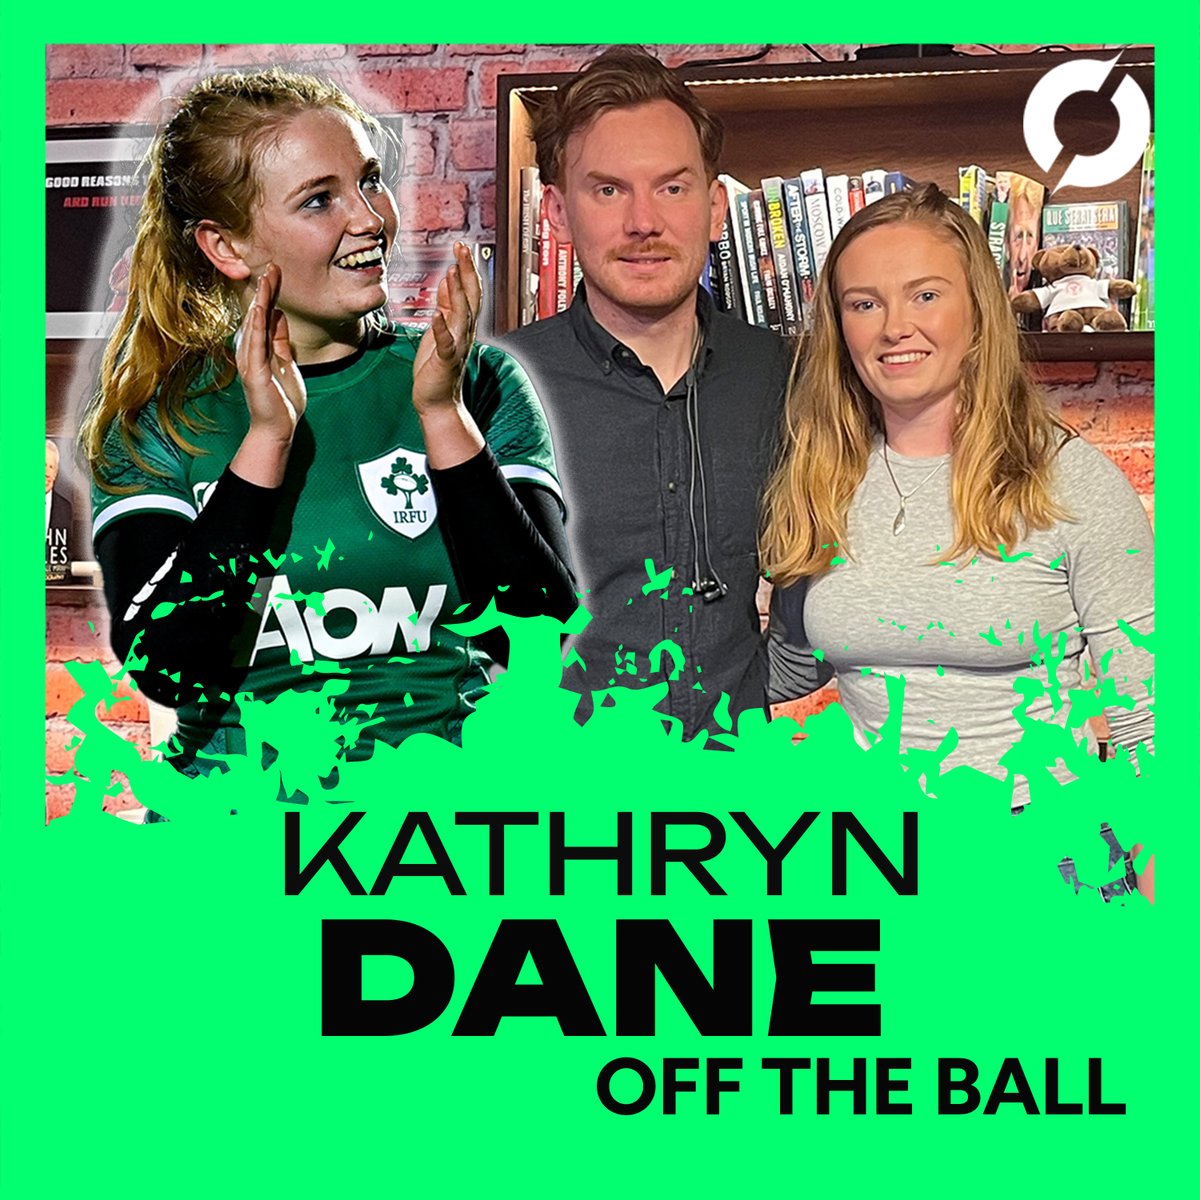 𝐊𝐀𝐓𝐇𝐑𝐘𝐍 𝐃𝐀𝐍𝐄 𝐈𝐍𝐓𝐄𝐑𝐕𝐈𝐄𝐖 - Recovering from a stroke at 26. - Tackling safety issues in rugby. 🏉Ireland international Kathryn Dane joined @EoinSheahan on Thursday's Off The Ball. 🎧: open.spotify.com/episode/60f8CK…